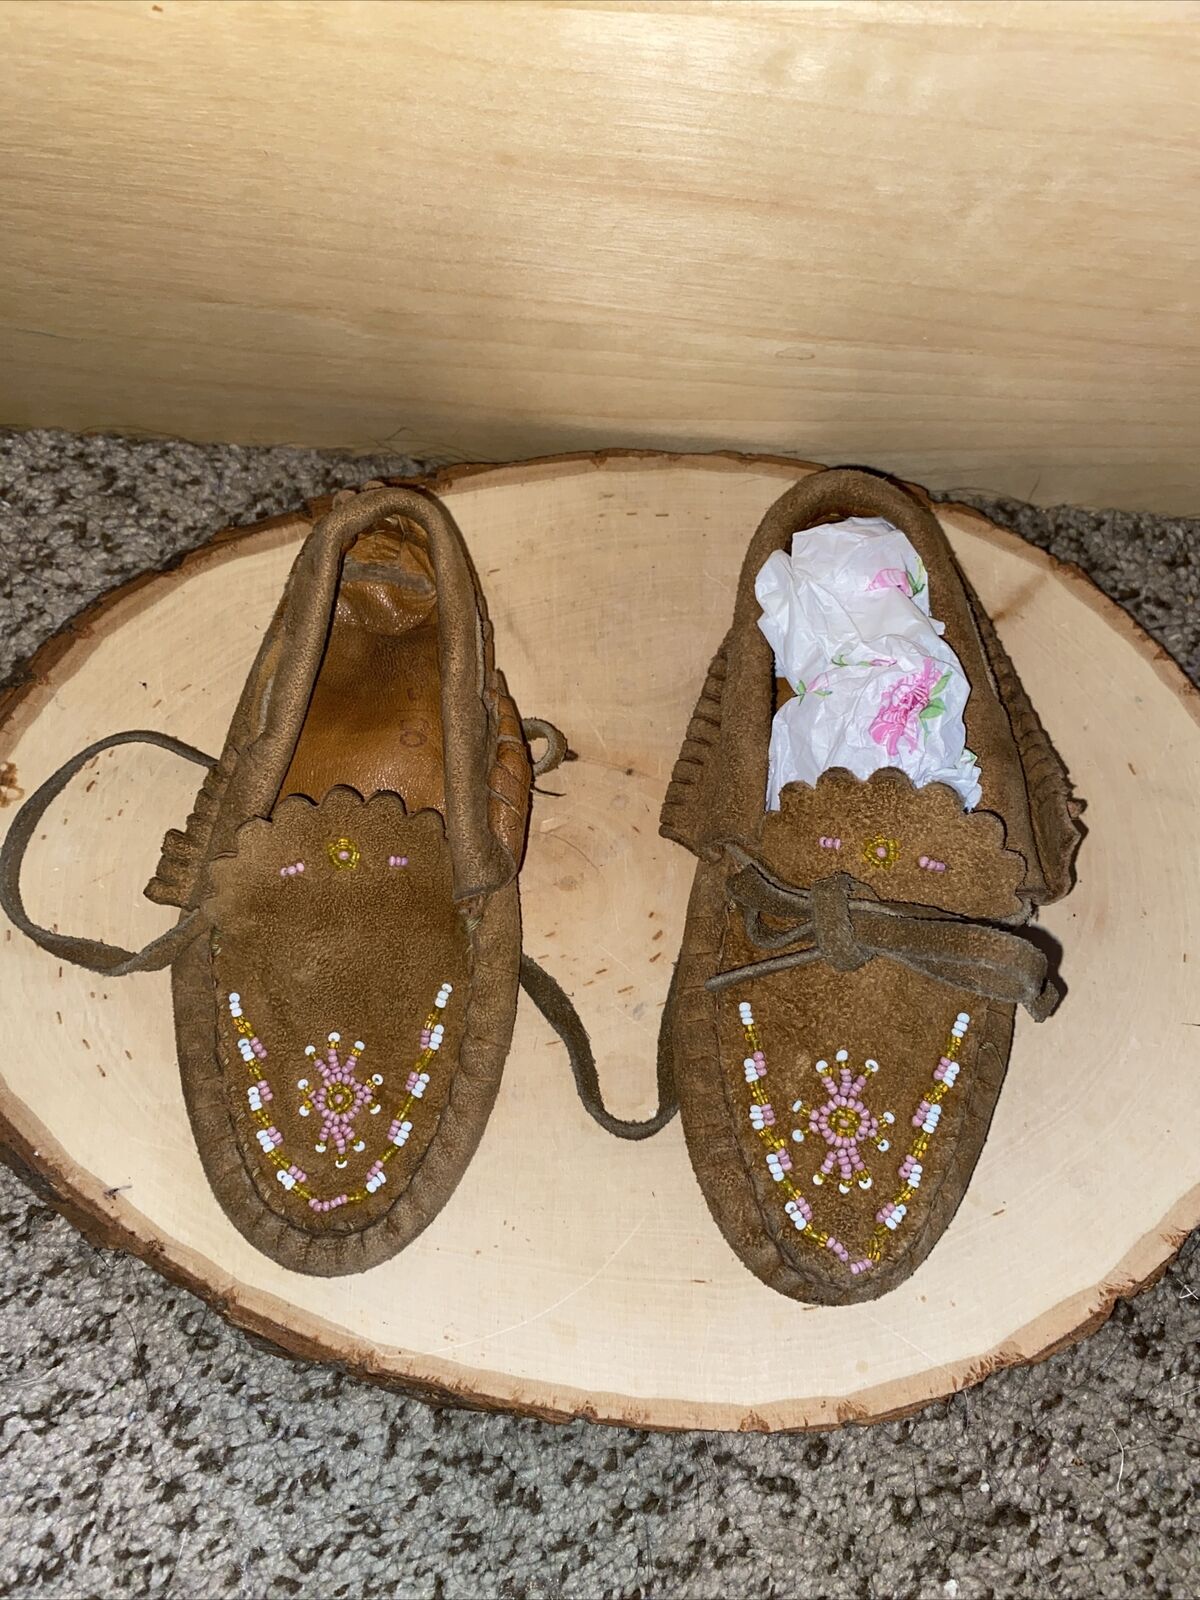 Vintage Handmade Suede Leather Baby Moccasin Shoes Stitched/Beaded/ Scalloped